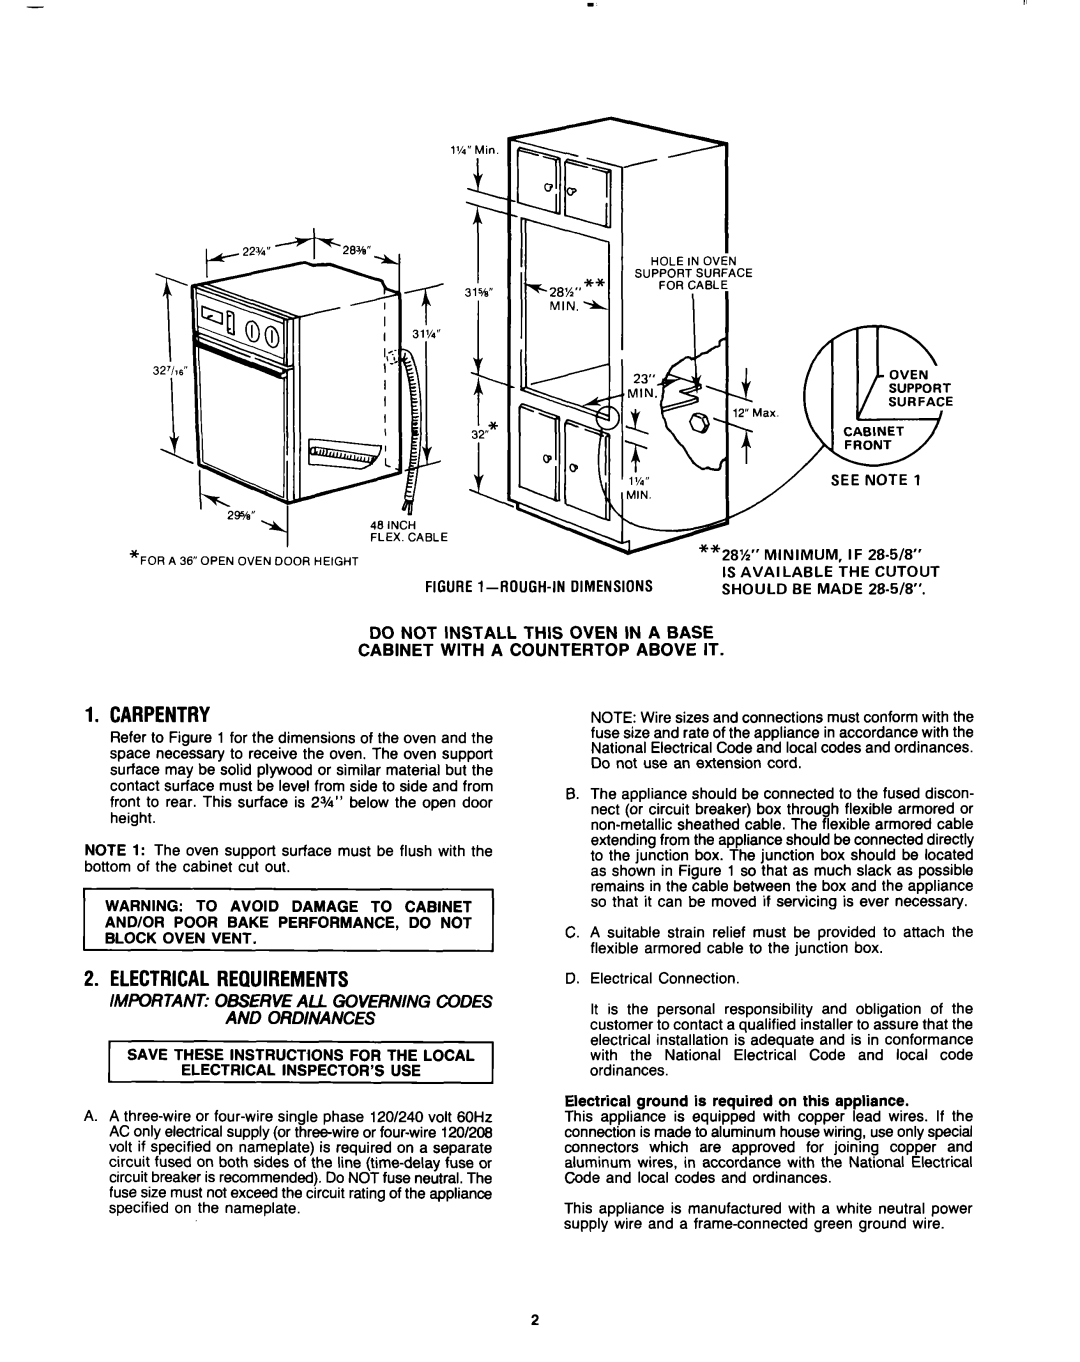 Whirlpool 1982 Carpentry, Electricalrequirements, Do Not Install This Oven In A Base, Cabinet With A Countertop Above It 